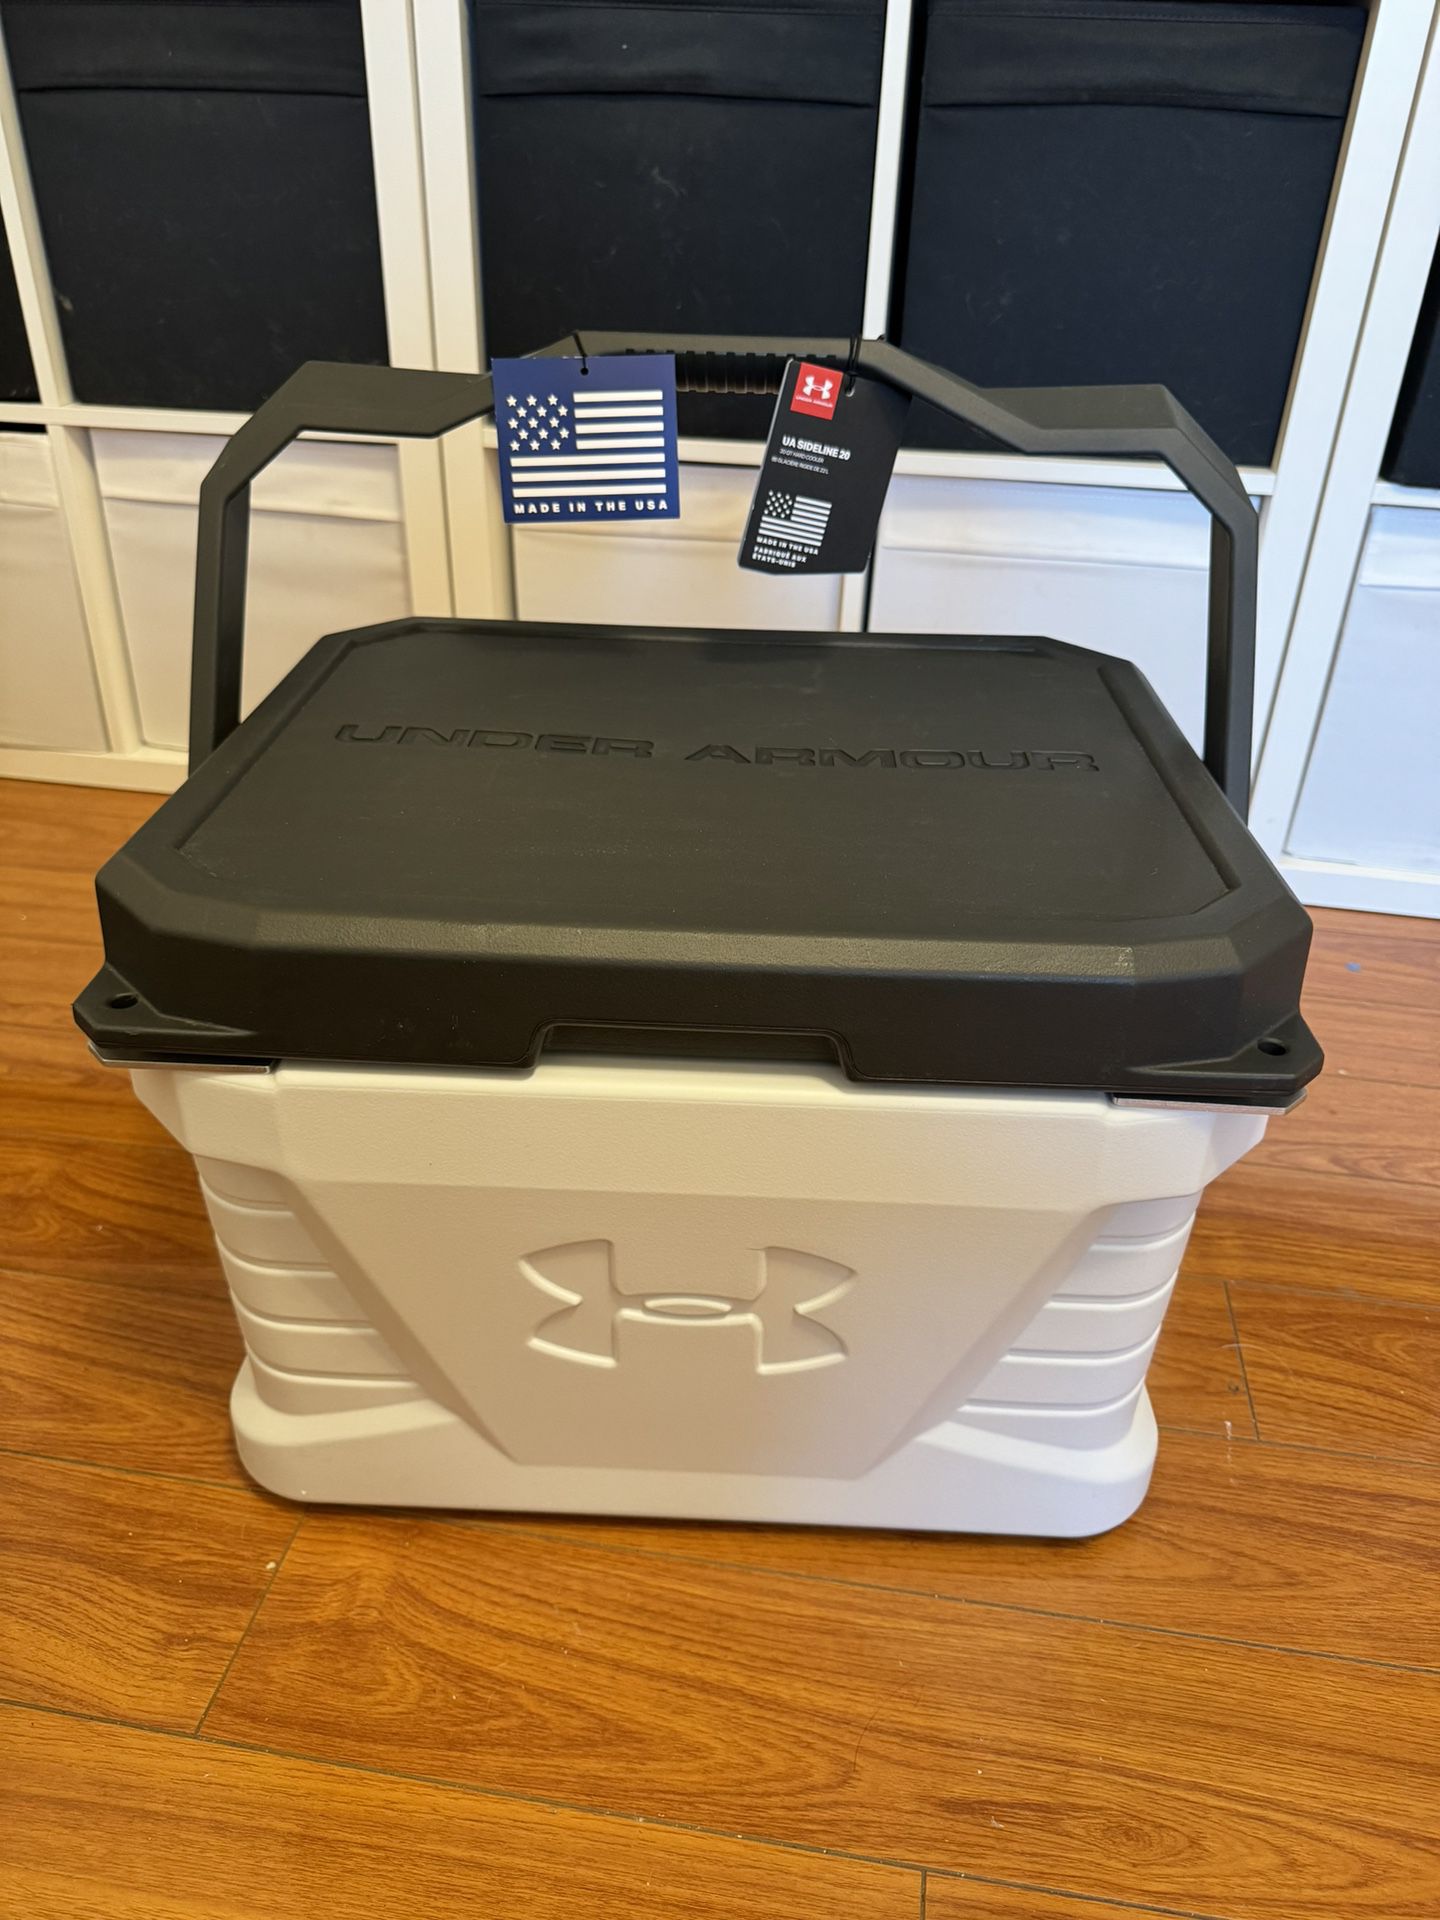 【Brand New | Ori Price: $199.99 | Perfect Gift】Under Armour Sideline 20 qt Hard Cooler by Thermos White NWT MADE IN USA